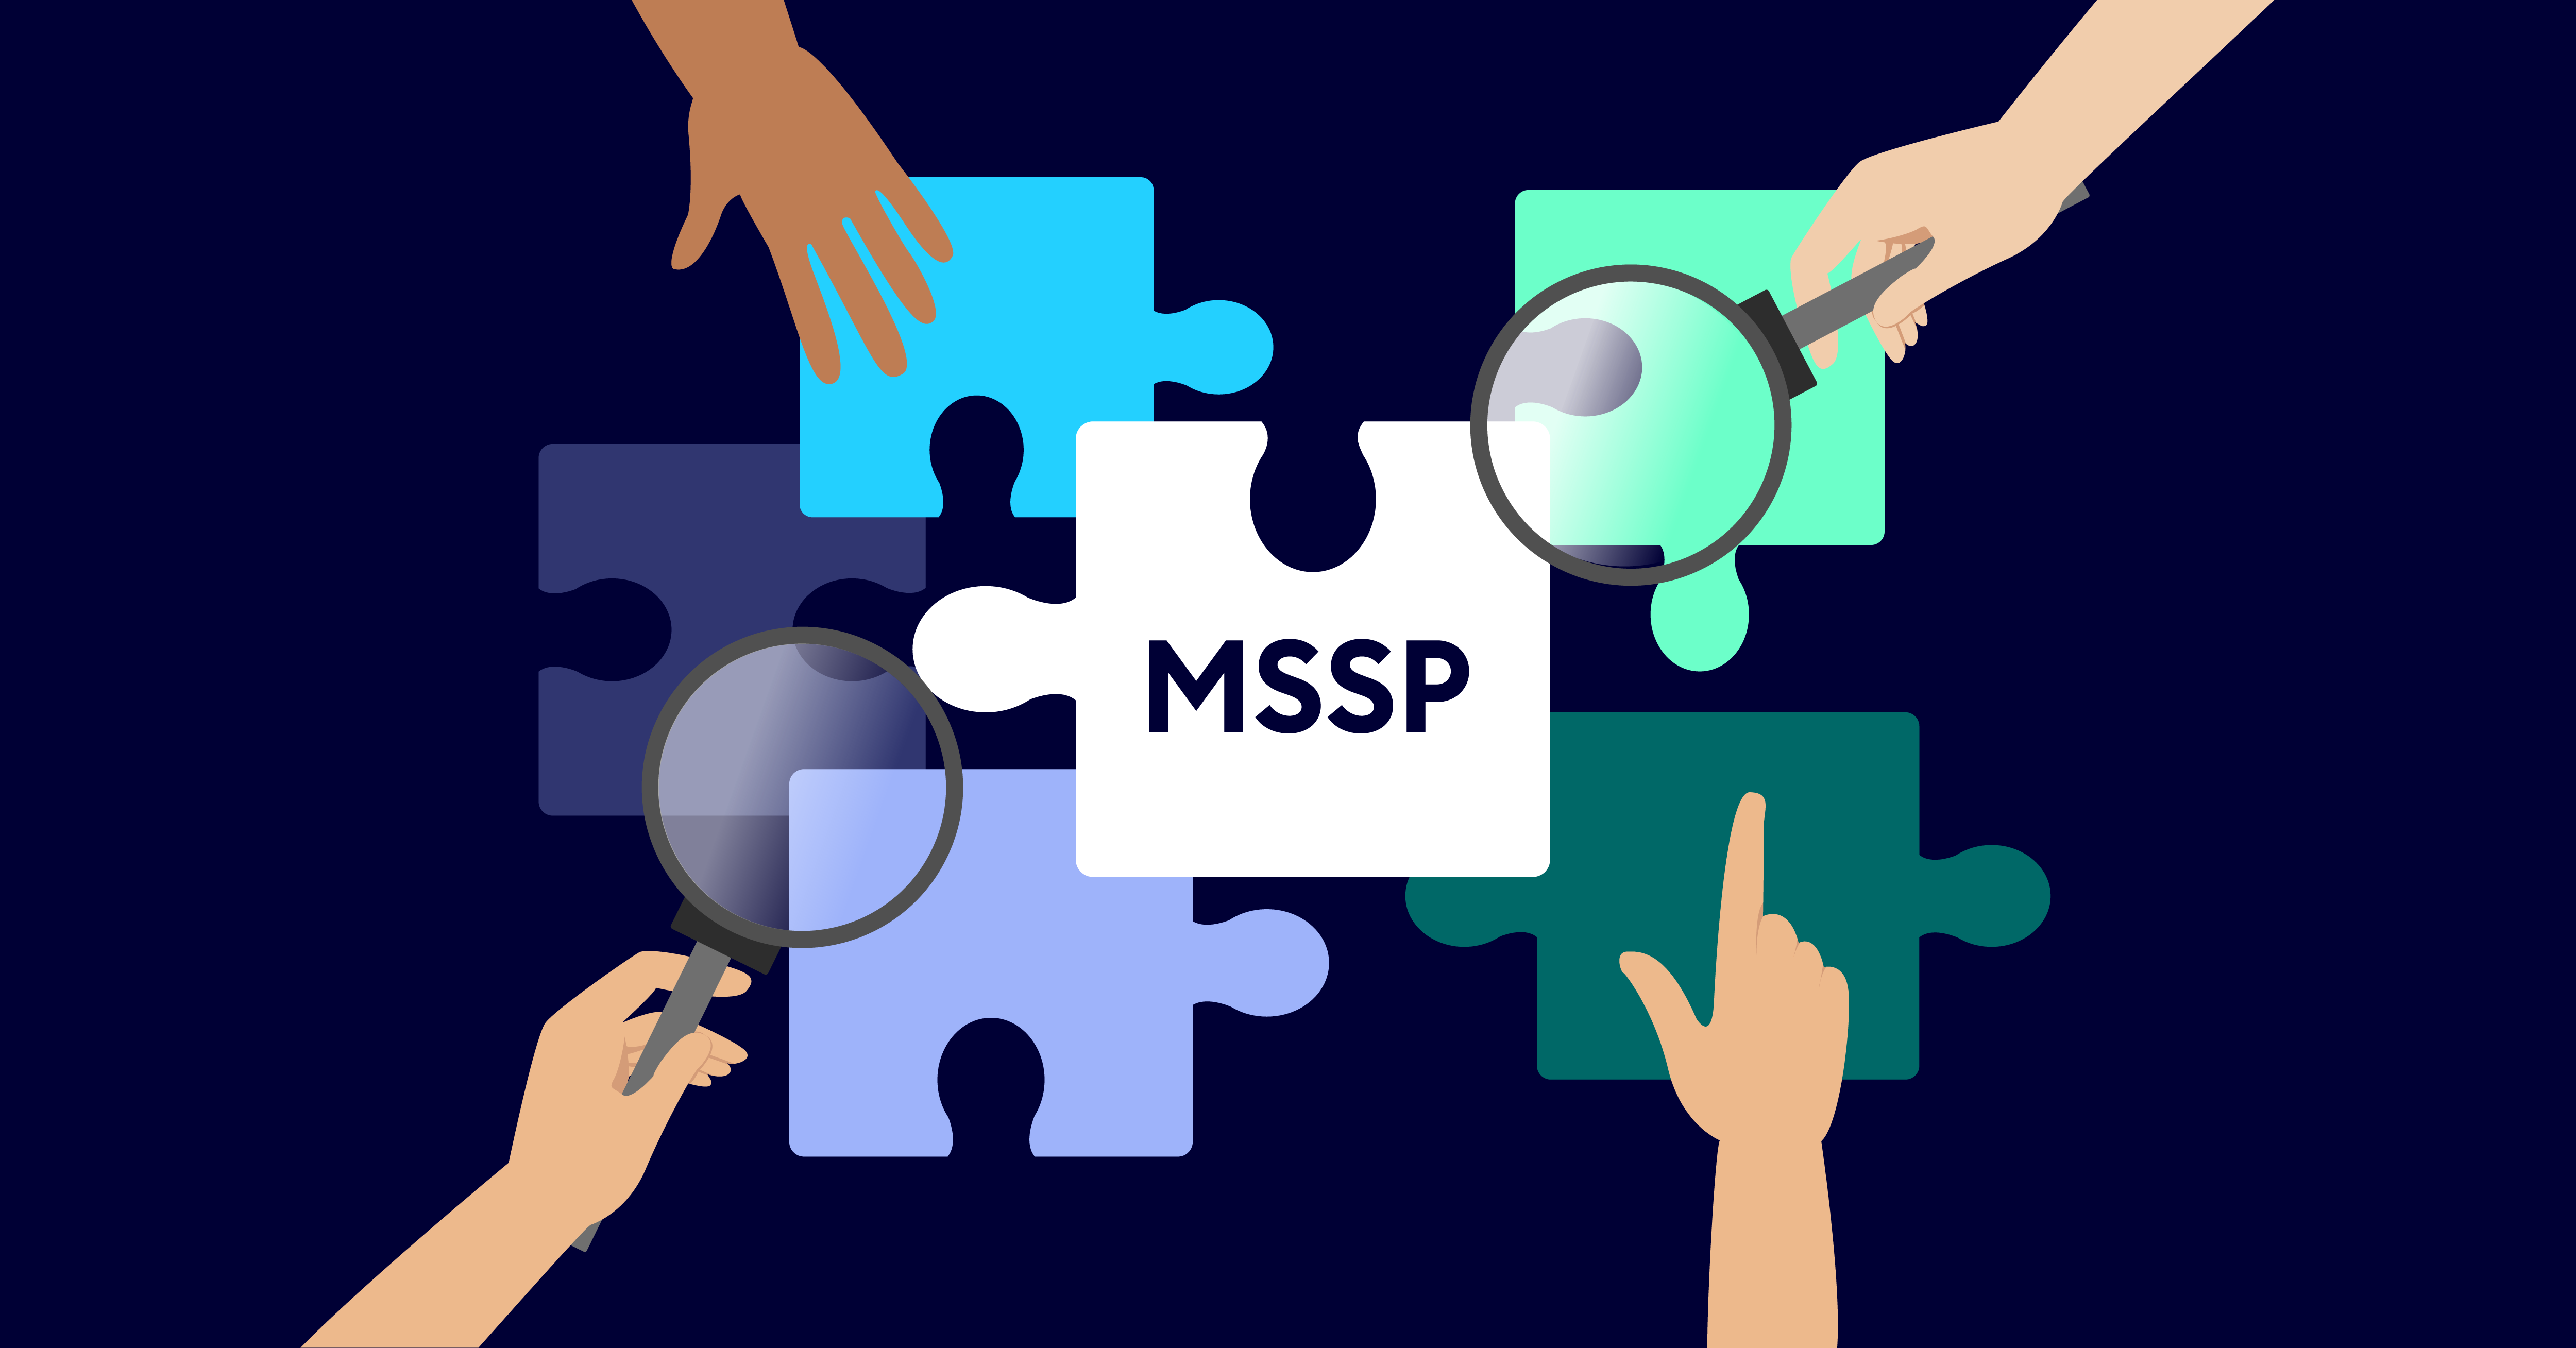 MSSP Quality Measures 2024 focuses on enhancing healthcare outcomes, patient satisfaction, and cost-efficiency through accountable care organizations and performance metrics.